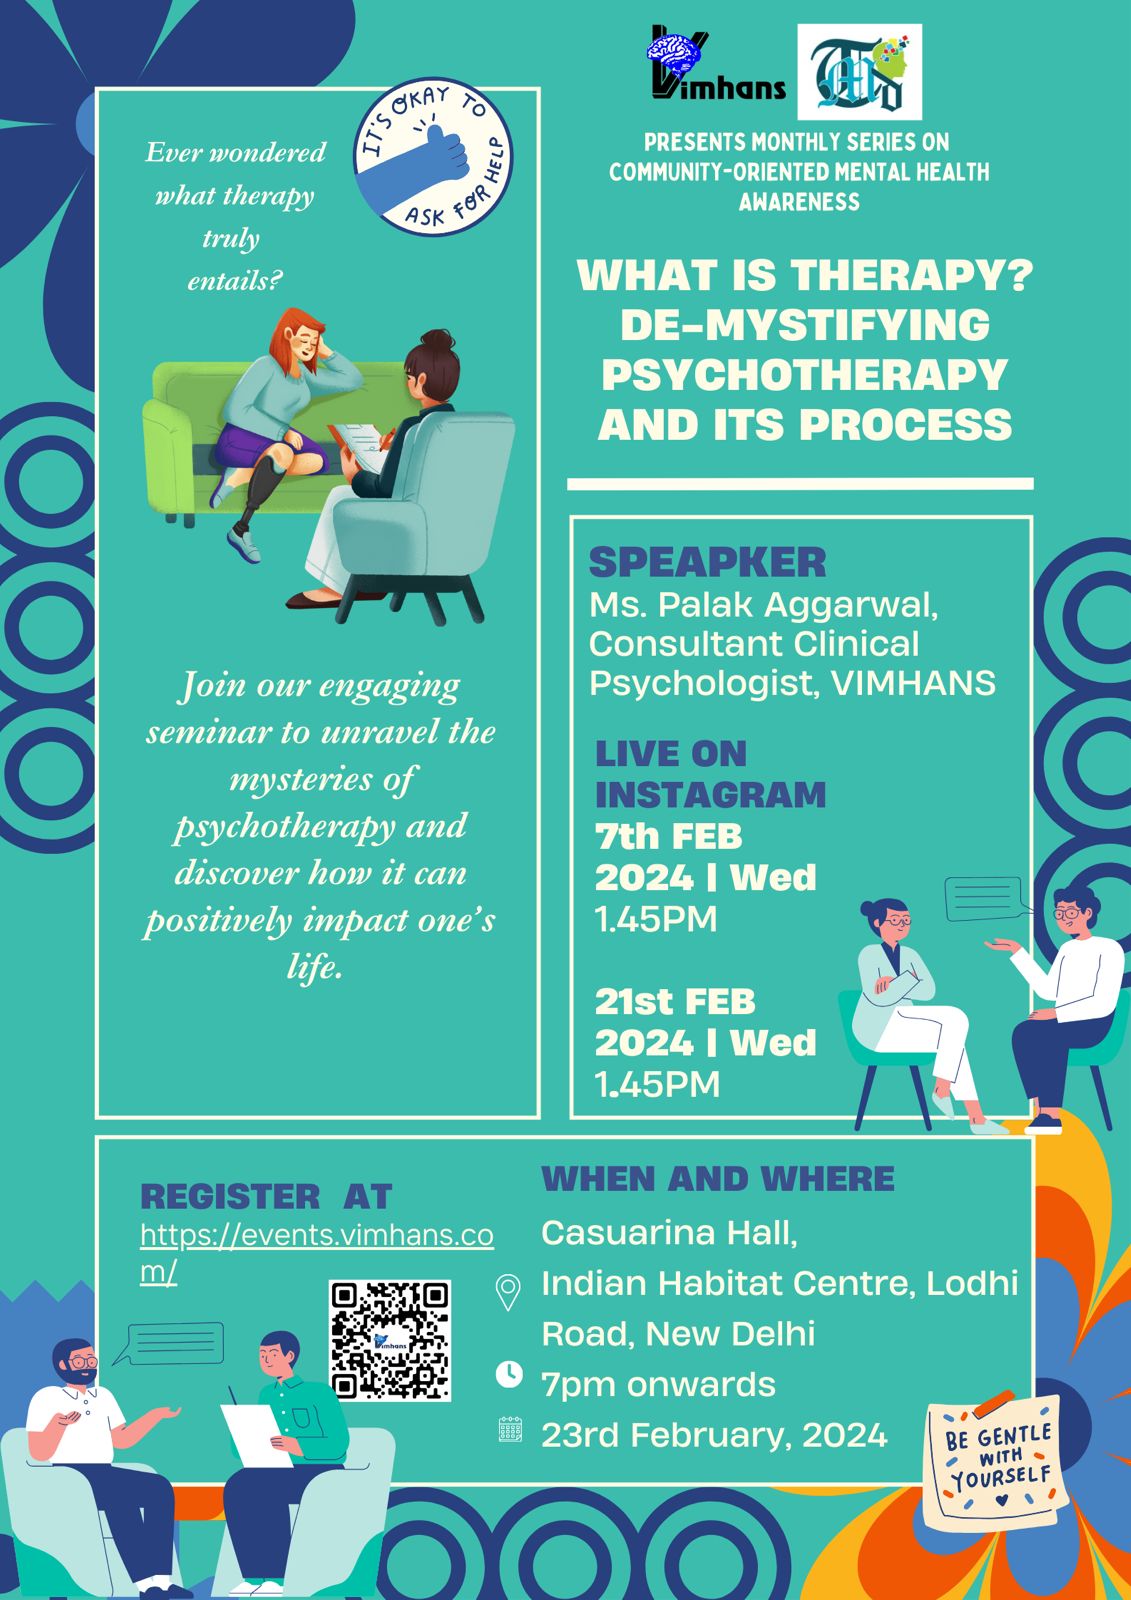 What IS THERAPY? DE-MYSTIFYING PSYCHOTHERAPY AND ITS PROCESS